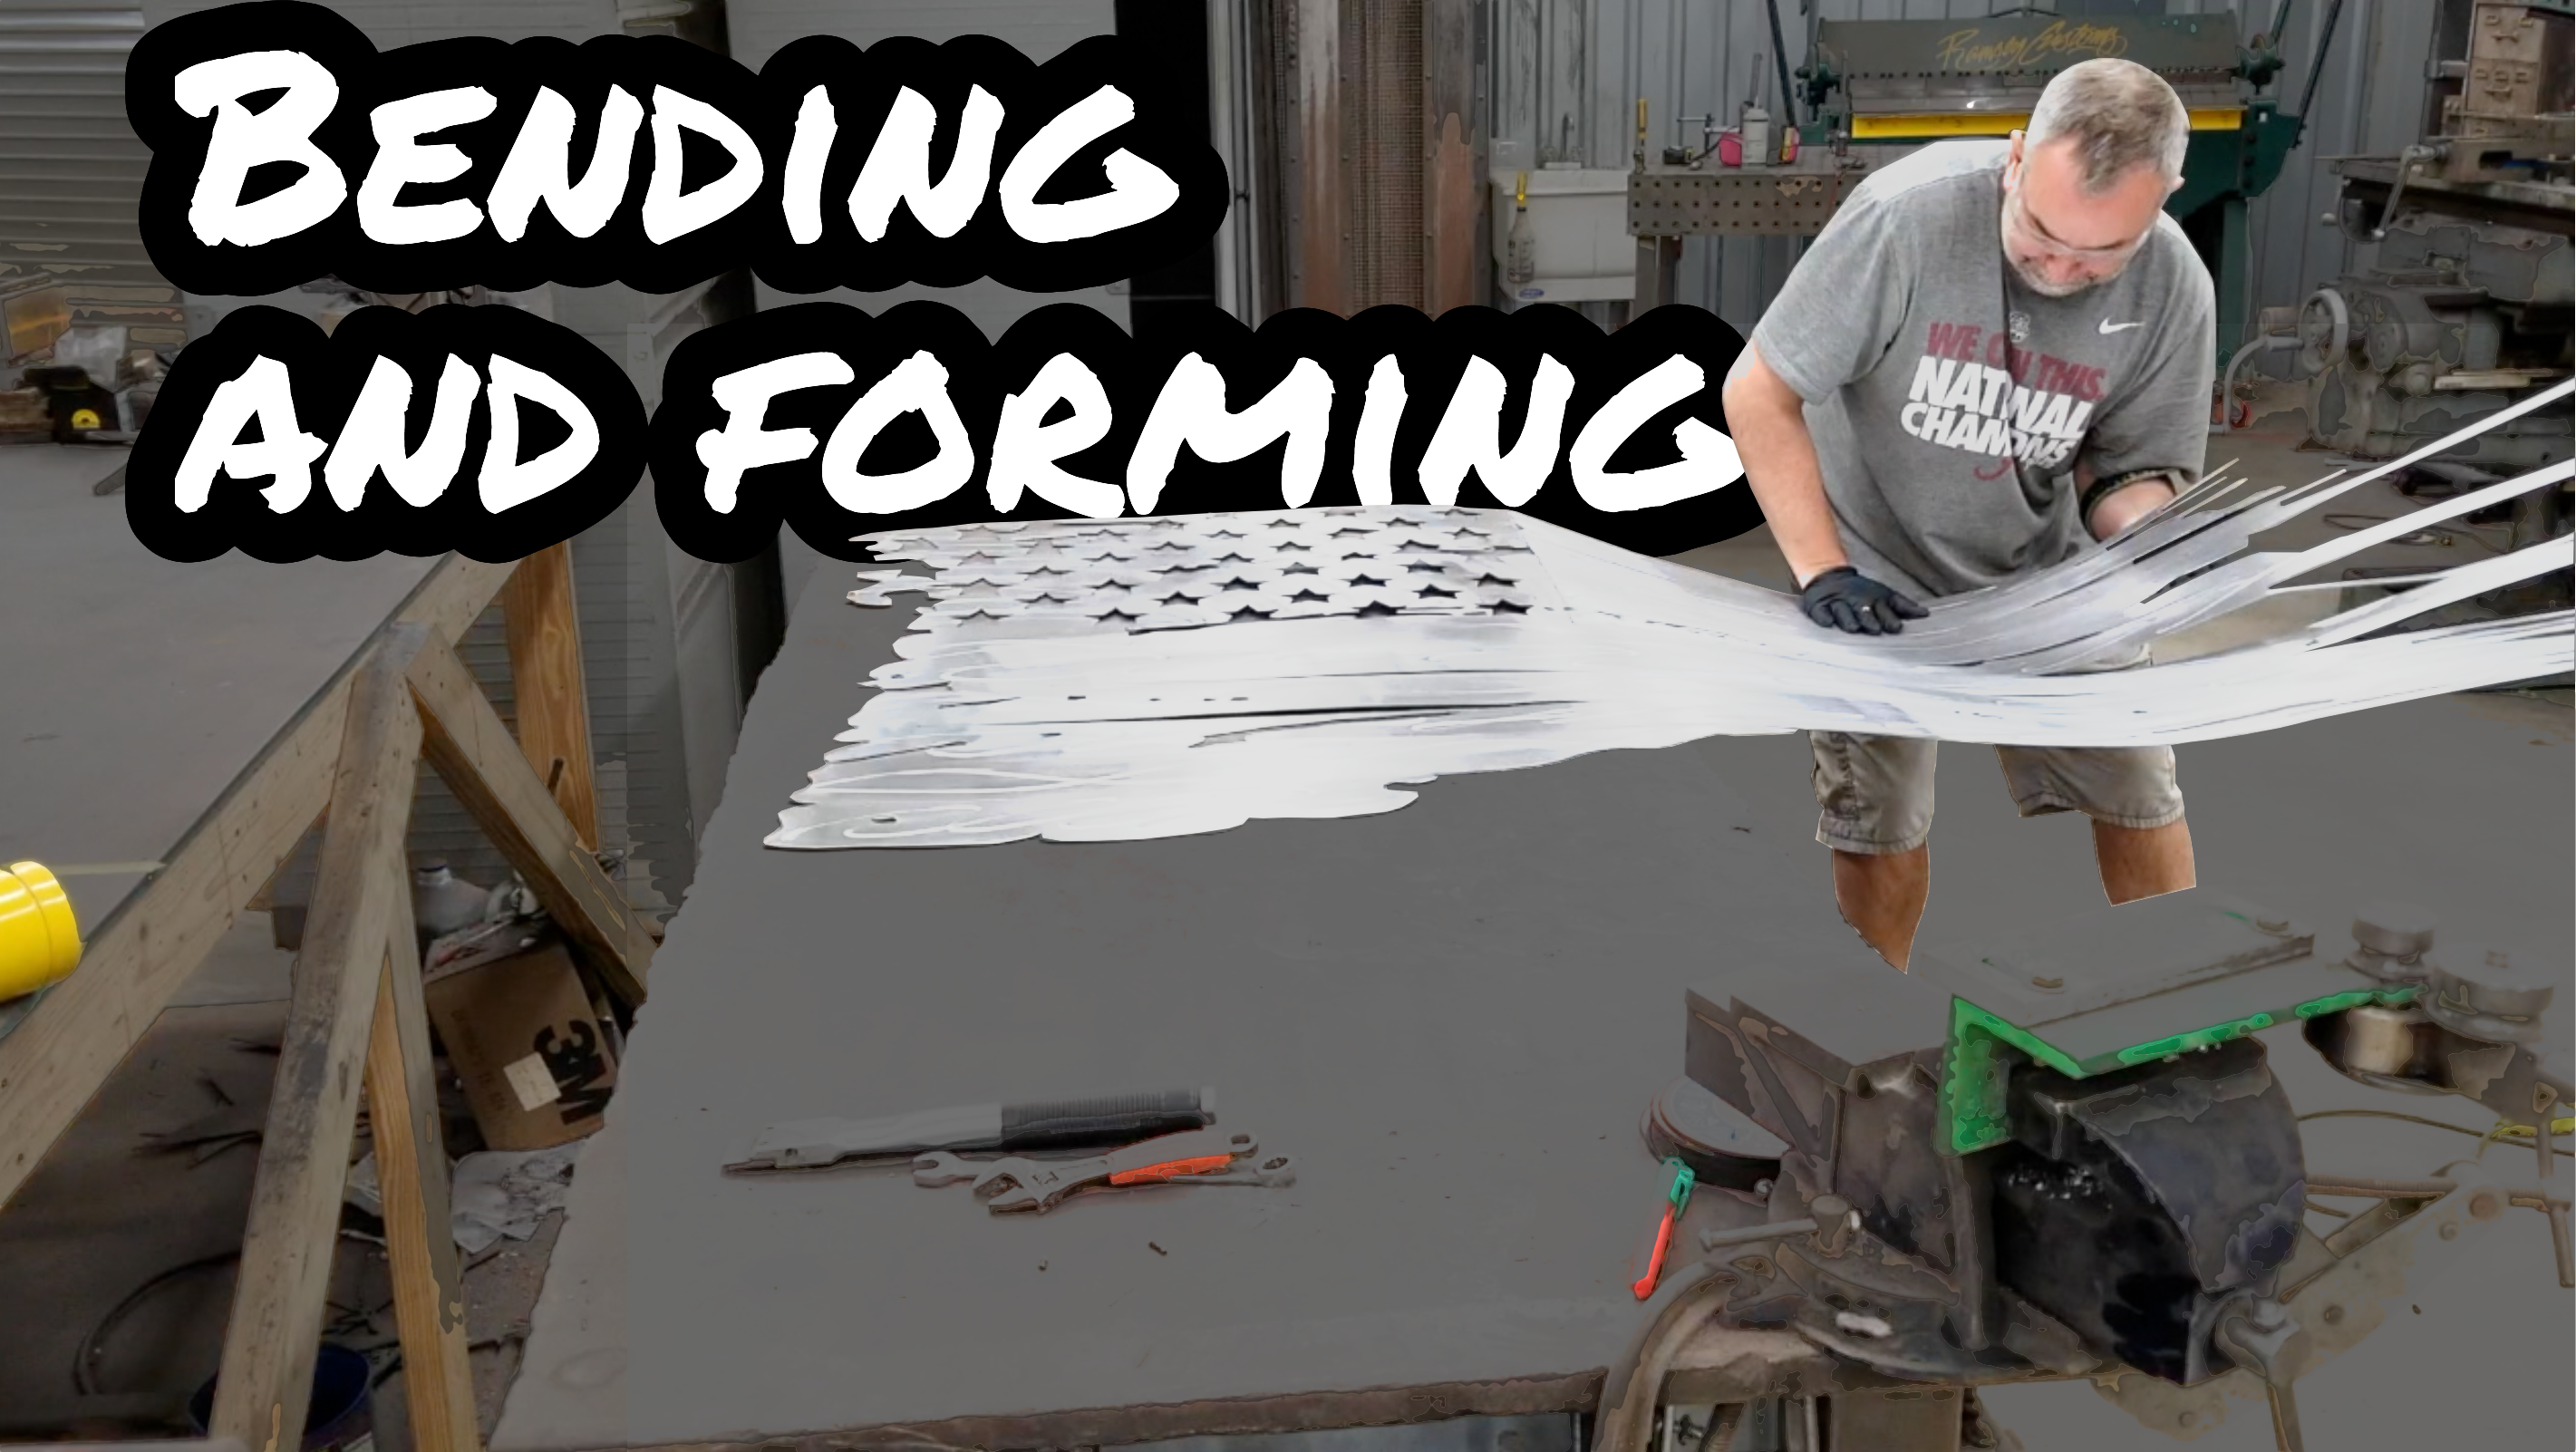 Step by Step How to Make a Tattered Metal Flag Video Training Series